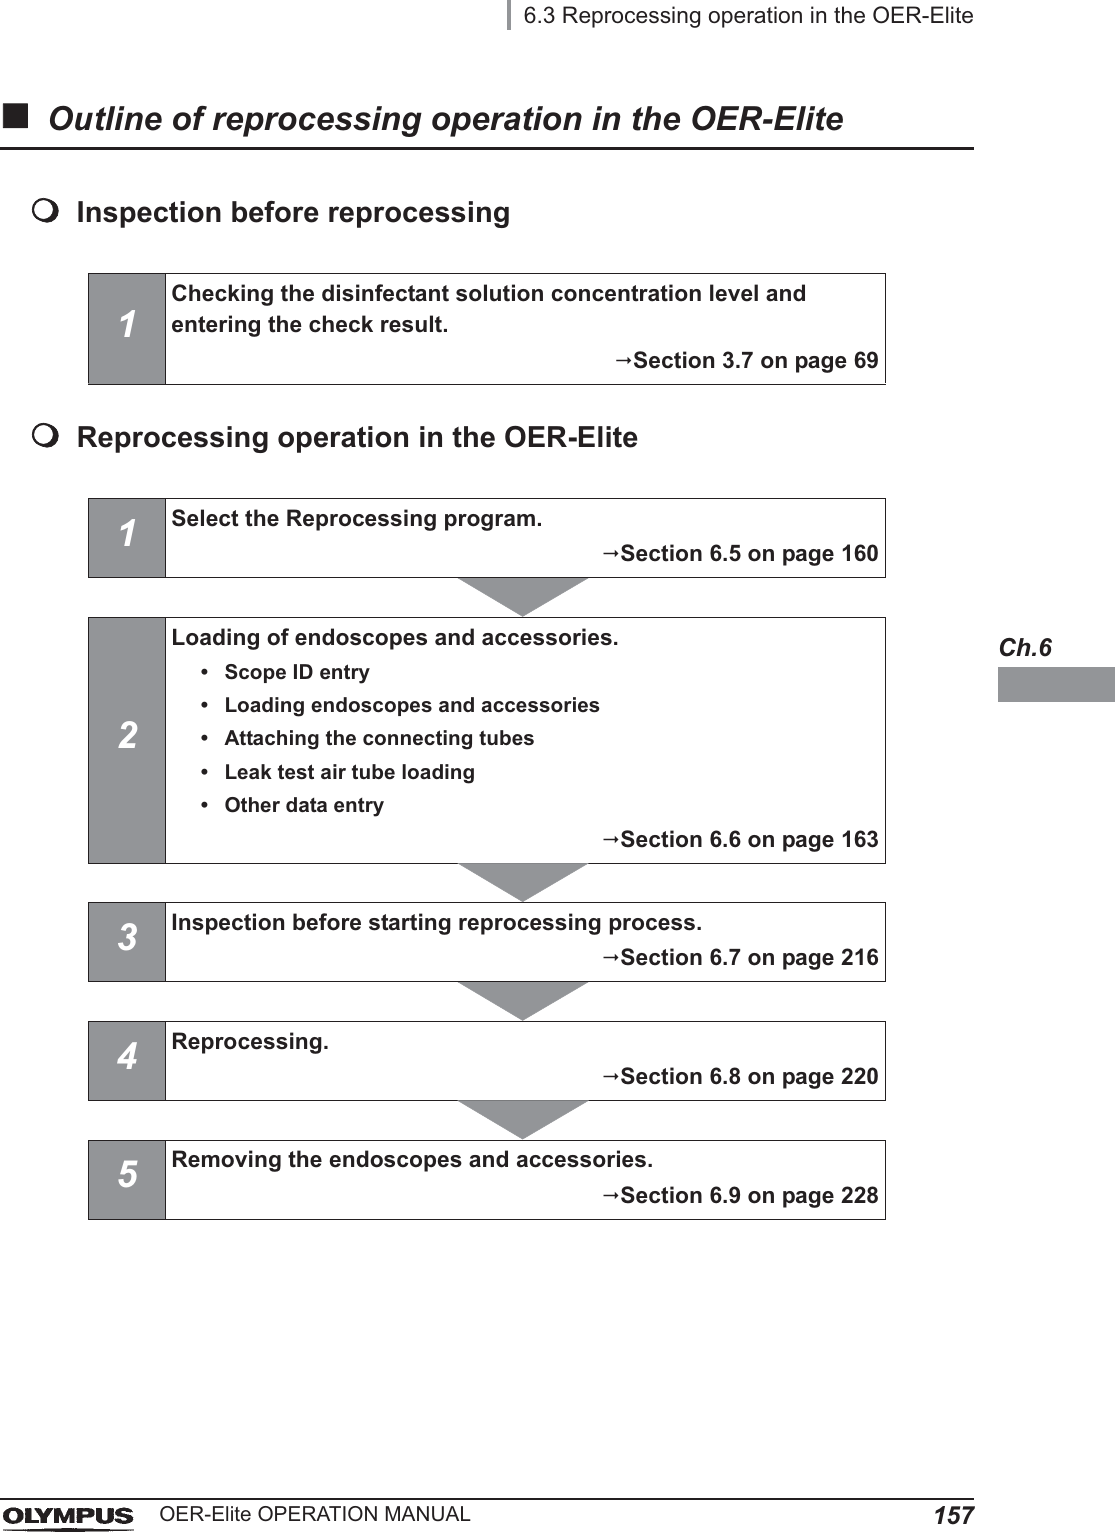 6.3 Reprocessing operation in the OER-Elite157OER-Elite OPERATION MANUALCh.6Outline of reprocessing operation in the OER-EliteInspection before reprocessingReprocessing operation in the OER-Elite1Checking the disinfectant solution concentration level and entering the check result.Section 3.7 on page 691Select the Reprocessing program.Section 6.5 on page 1602Loading of endoscopes and accessories.• Scope ID entry• Loading endoscopes and accessories• Attaching the connecting tubes• Leak test air tube loading• Other data entrySection 6.6 on page 1633Inspection before starting reprocessing process.Section 6.7 on page 2164Reprocessing.Section 6.8 on page 2205Removing the endoscopes and accessories.Section 6.9 on page 228